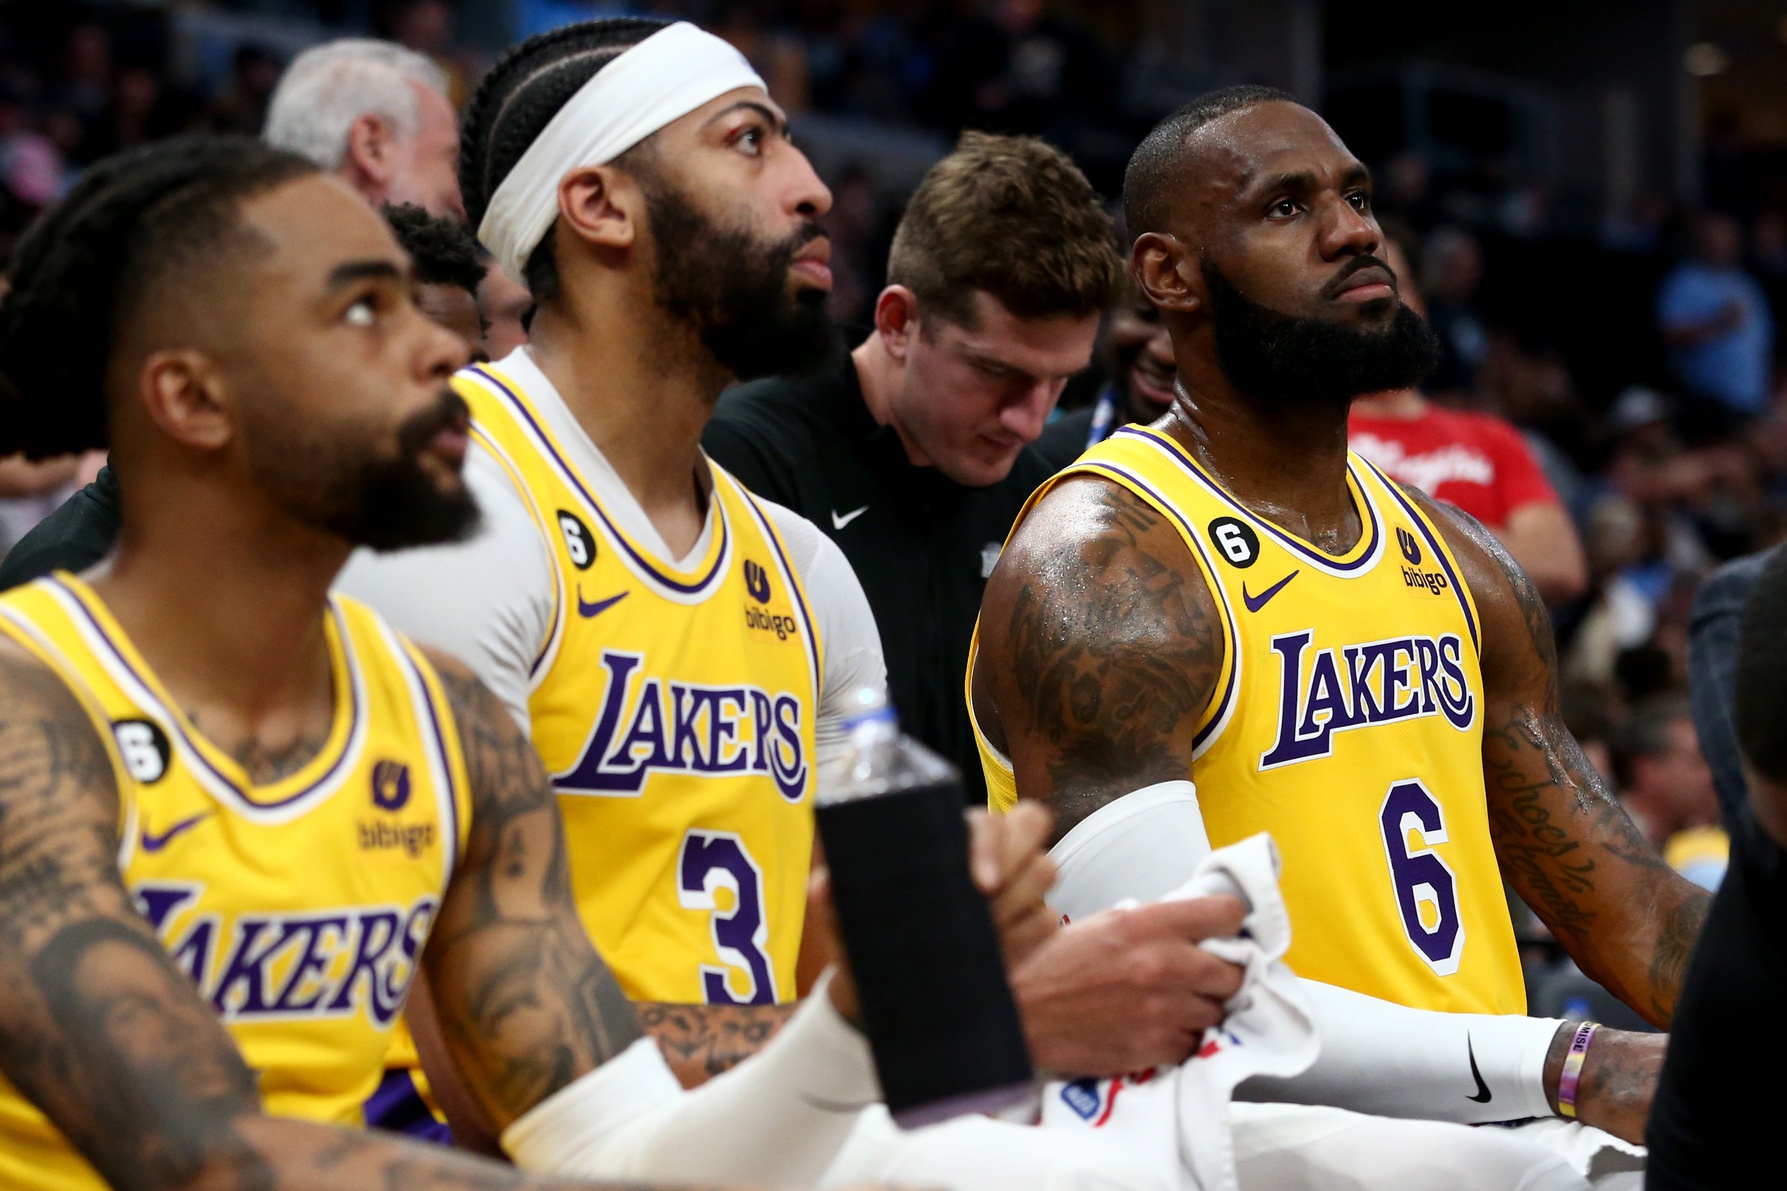 NBA Betting Promos For Saturday, Including Lakers vs. Nuggets